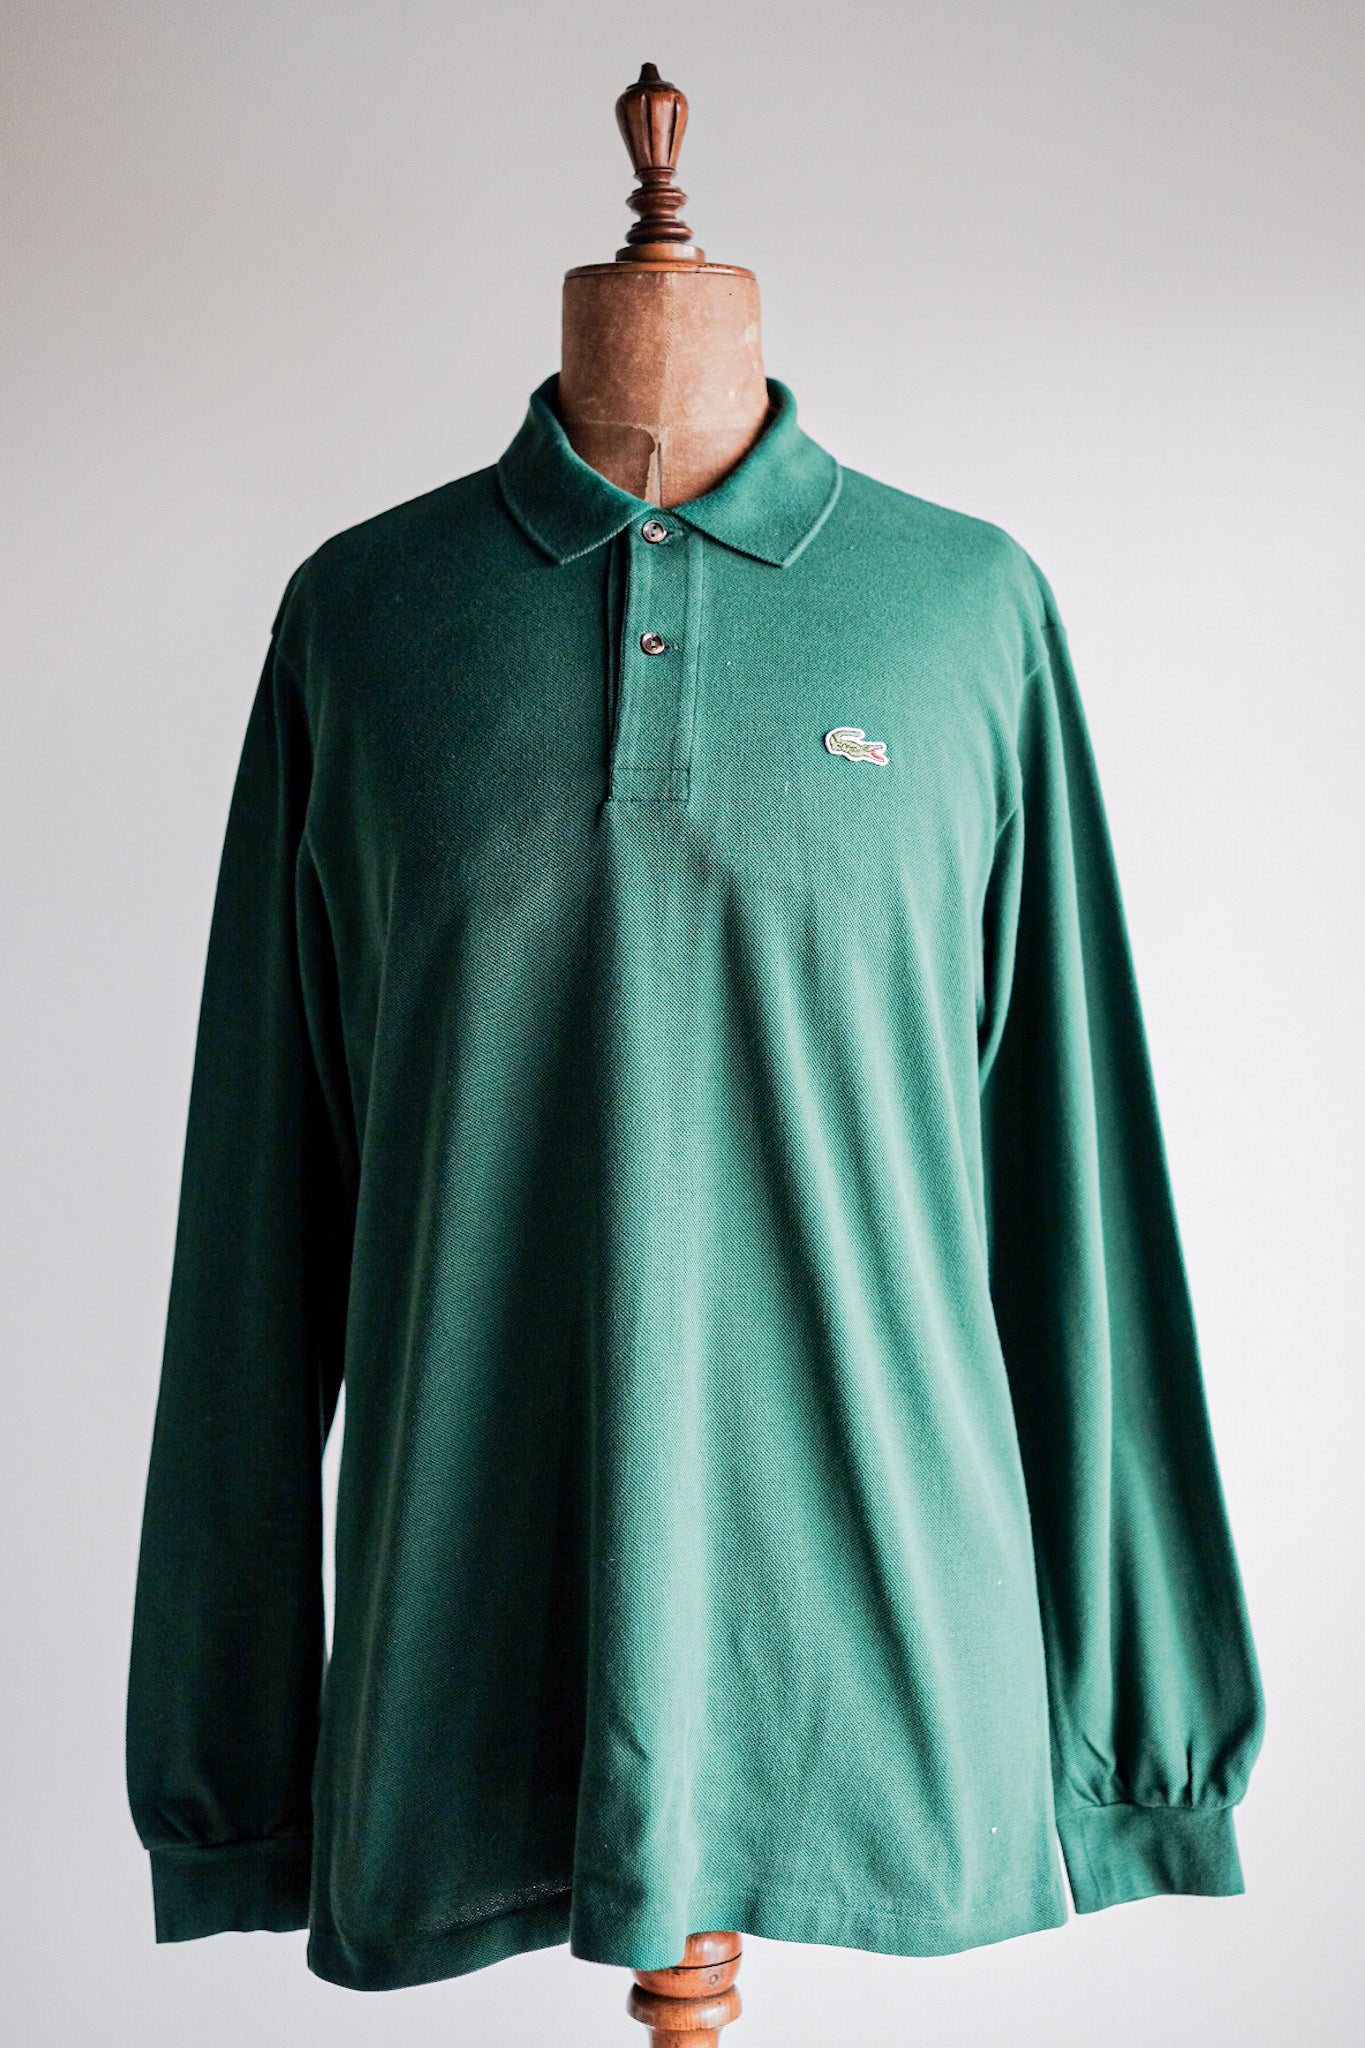 [~ 80's] Chemise Lacoste L / S Polo Taille.5 "Forest Green"